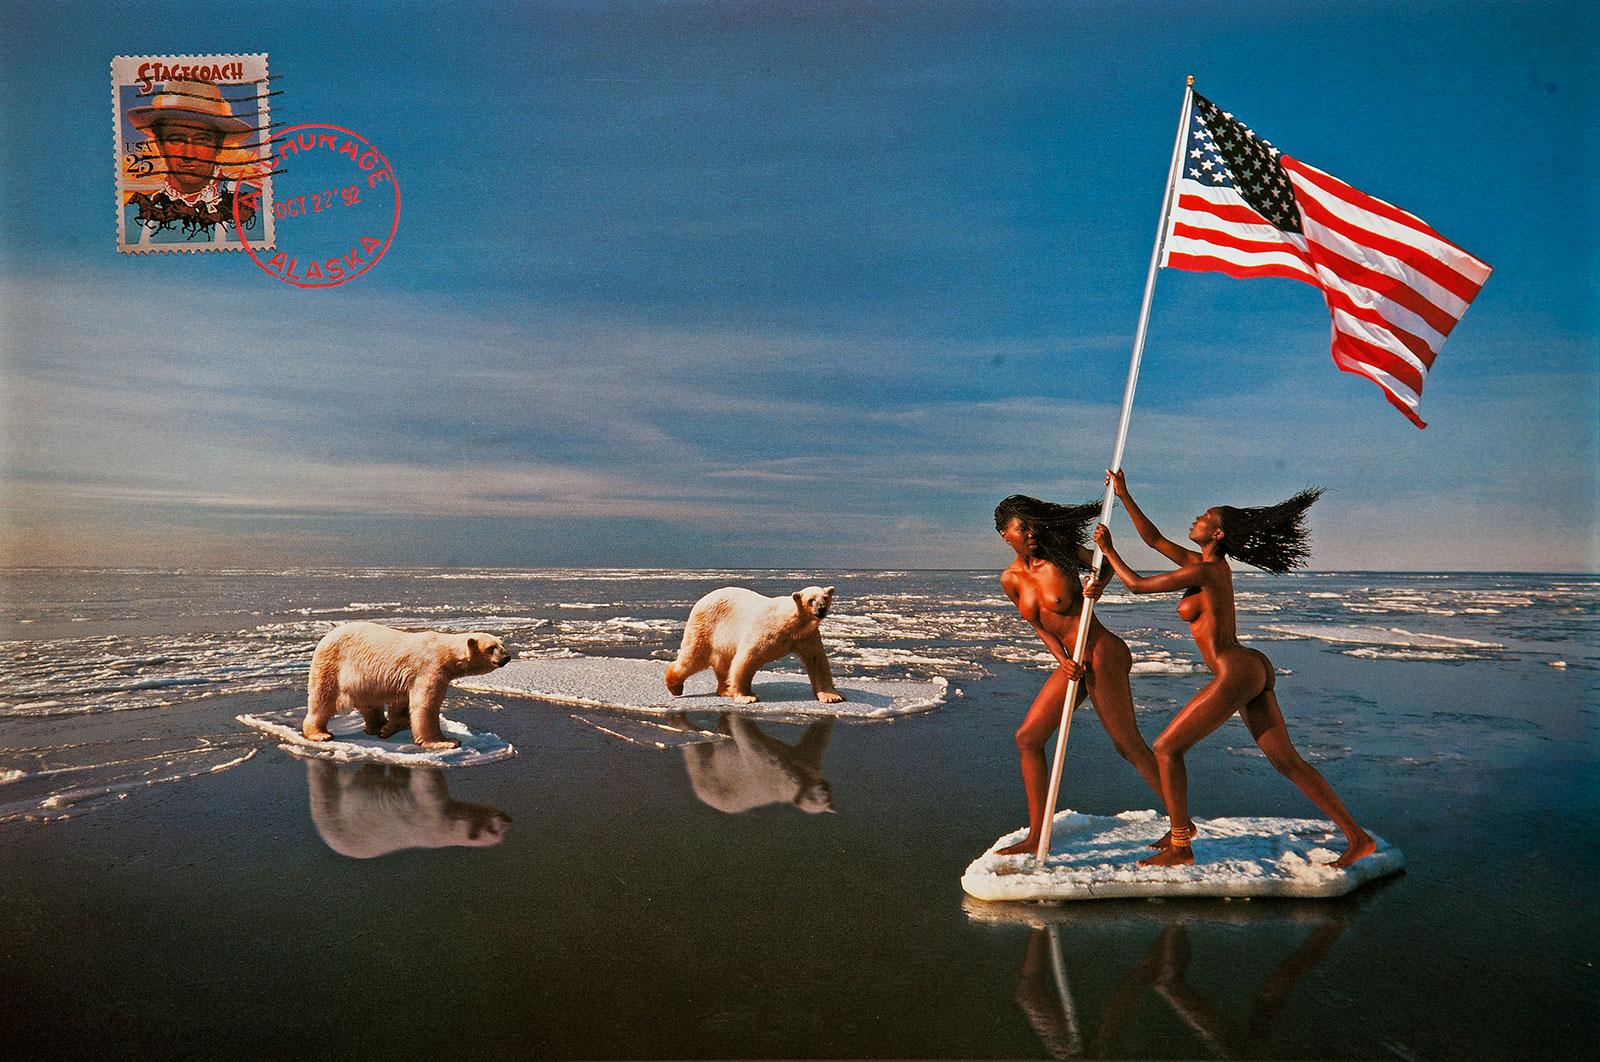 Uwe Ommer Color Photograph - Alaska, From the Mani- Cartes Postales series. 